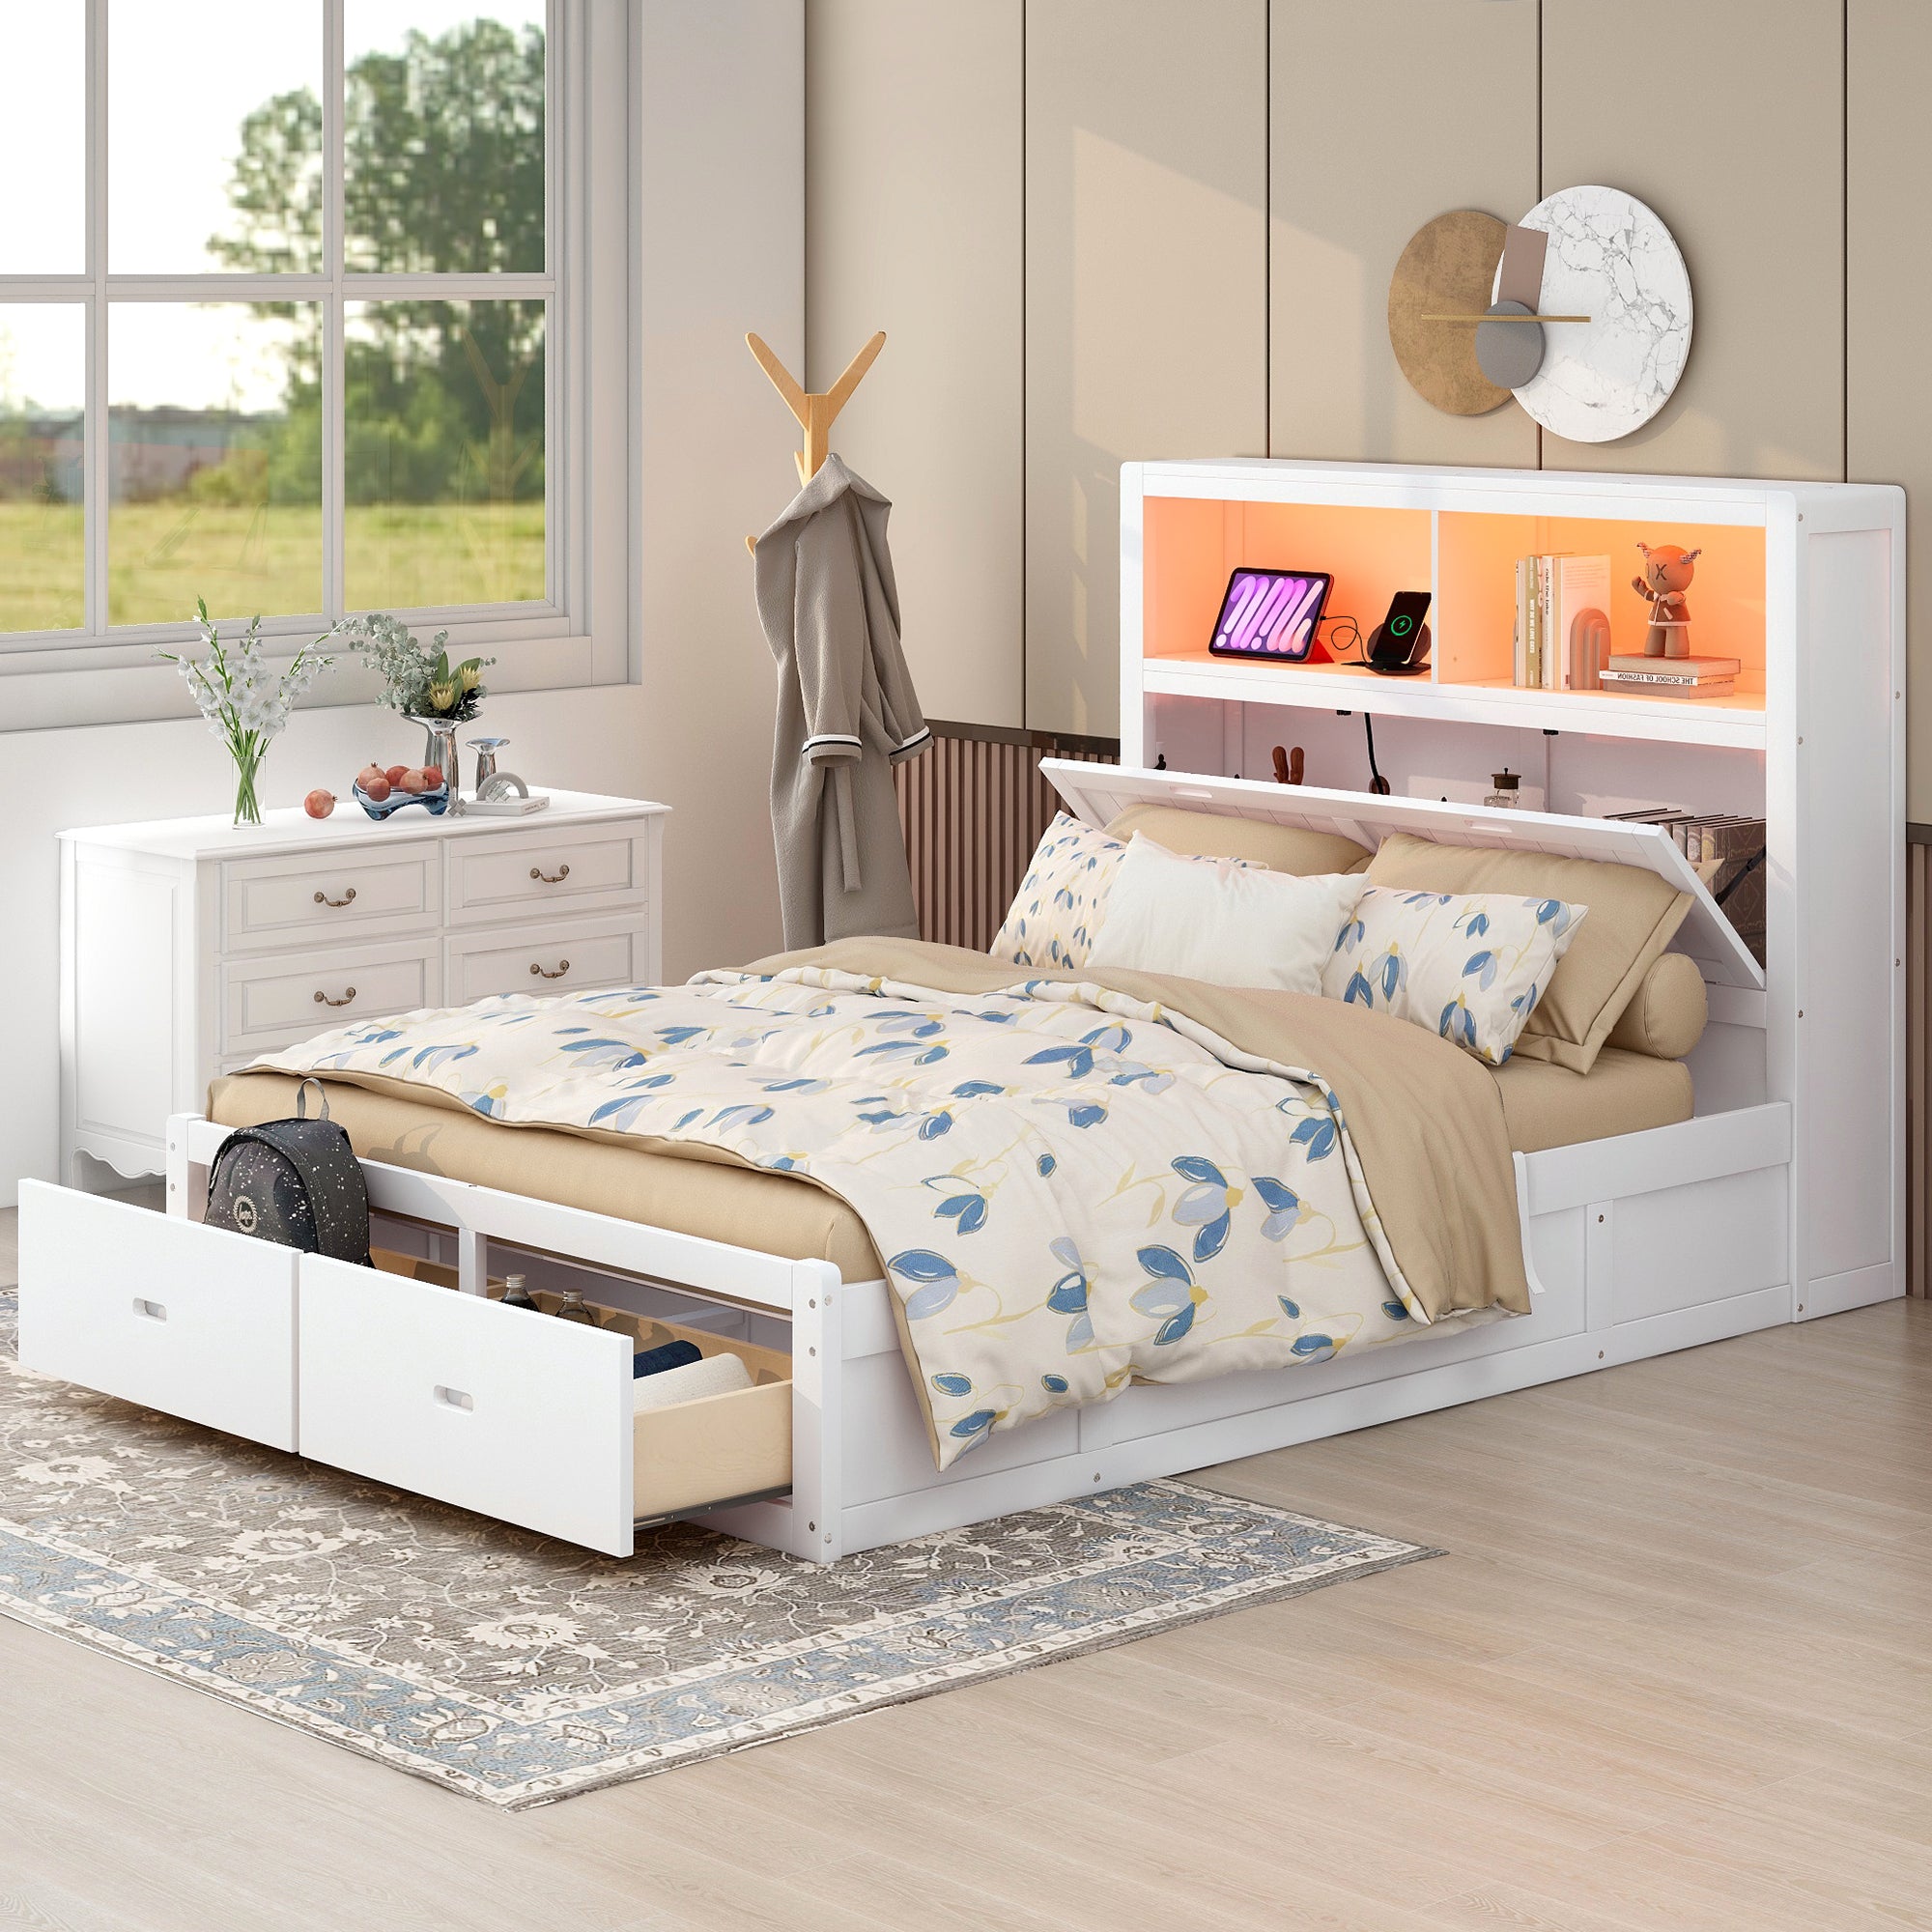 🆓🚛 Wood Queen Size Hydraulic Platform Bed with Storage LED Headboard, Charging Station and 2 Drawers, White